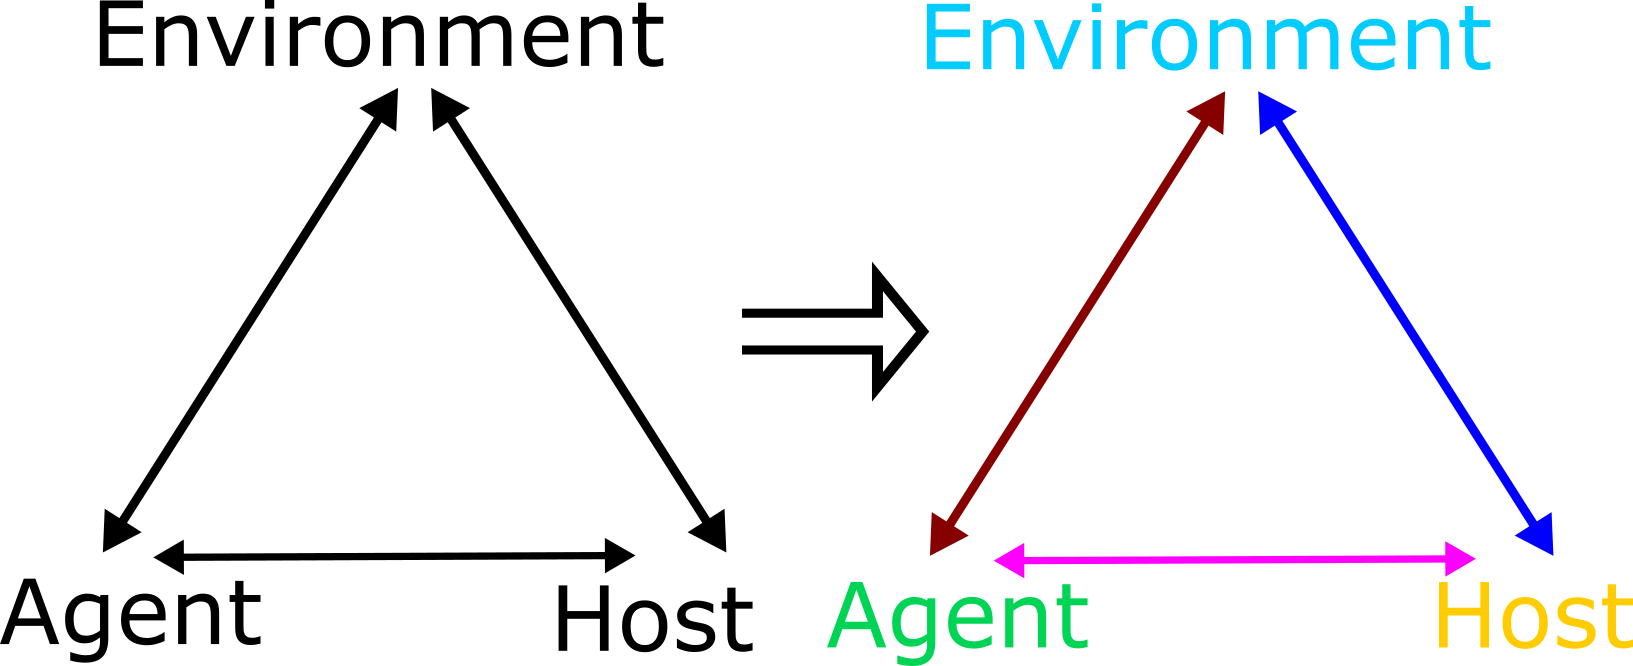 Dynamic Epidemiological Triangle. Interactions between agent, host and environment change explicitly with time - indicated by the different coloring for each component and interaction.